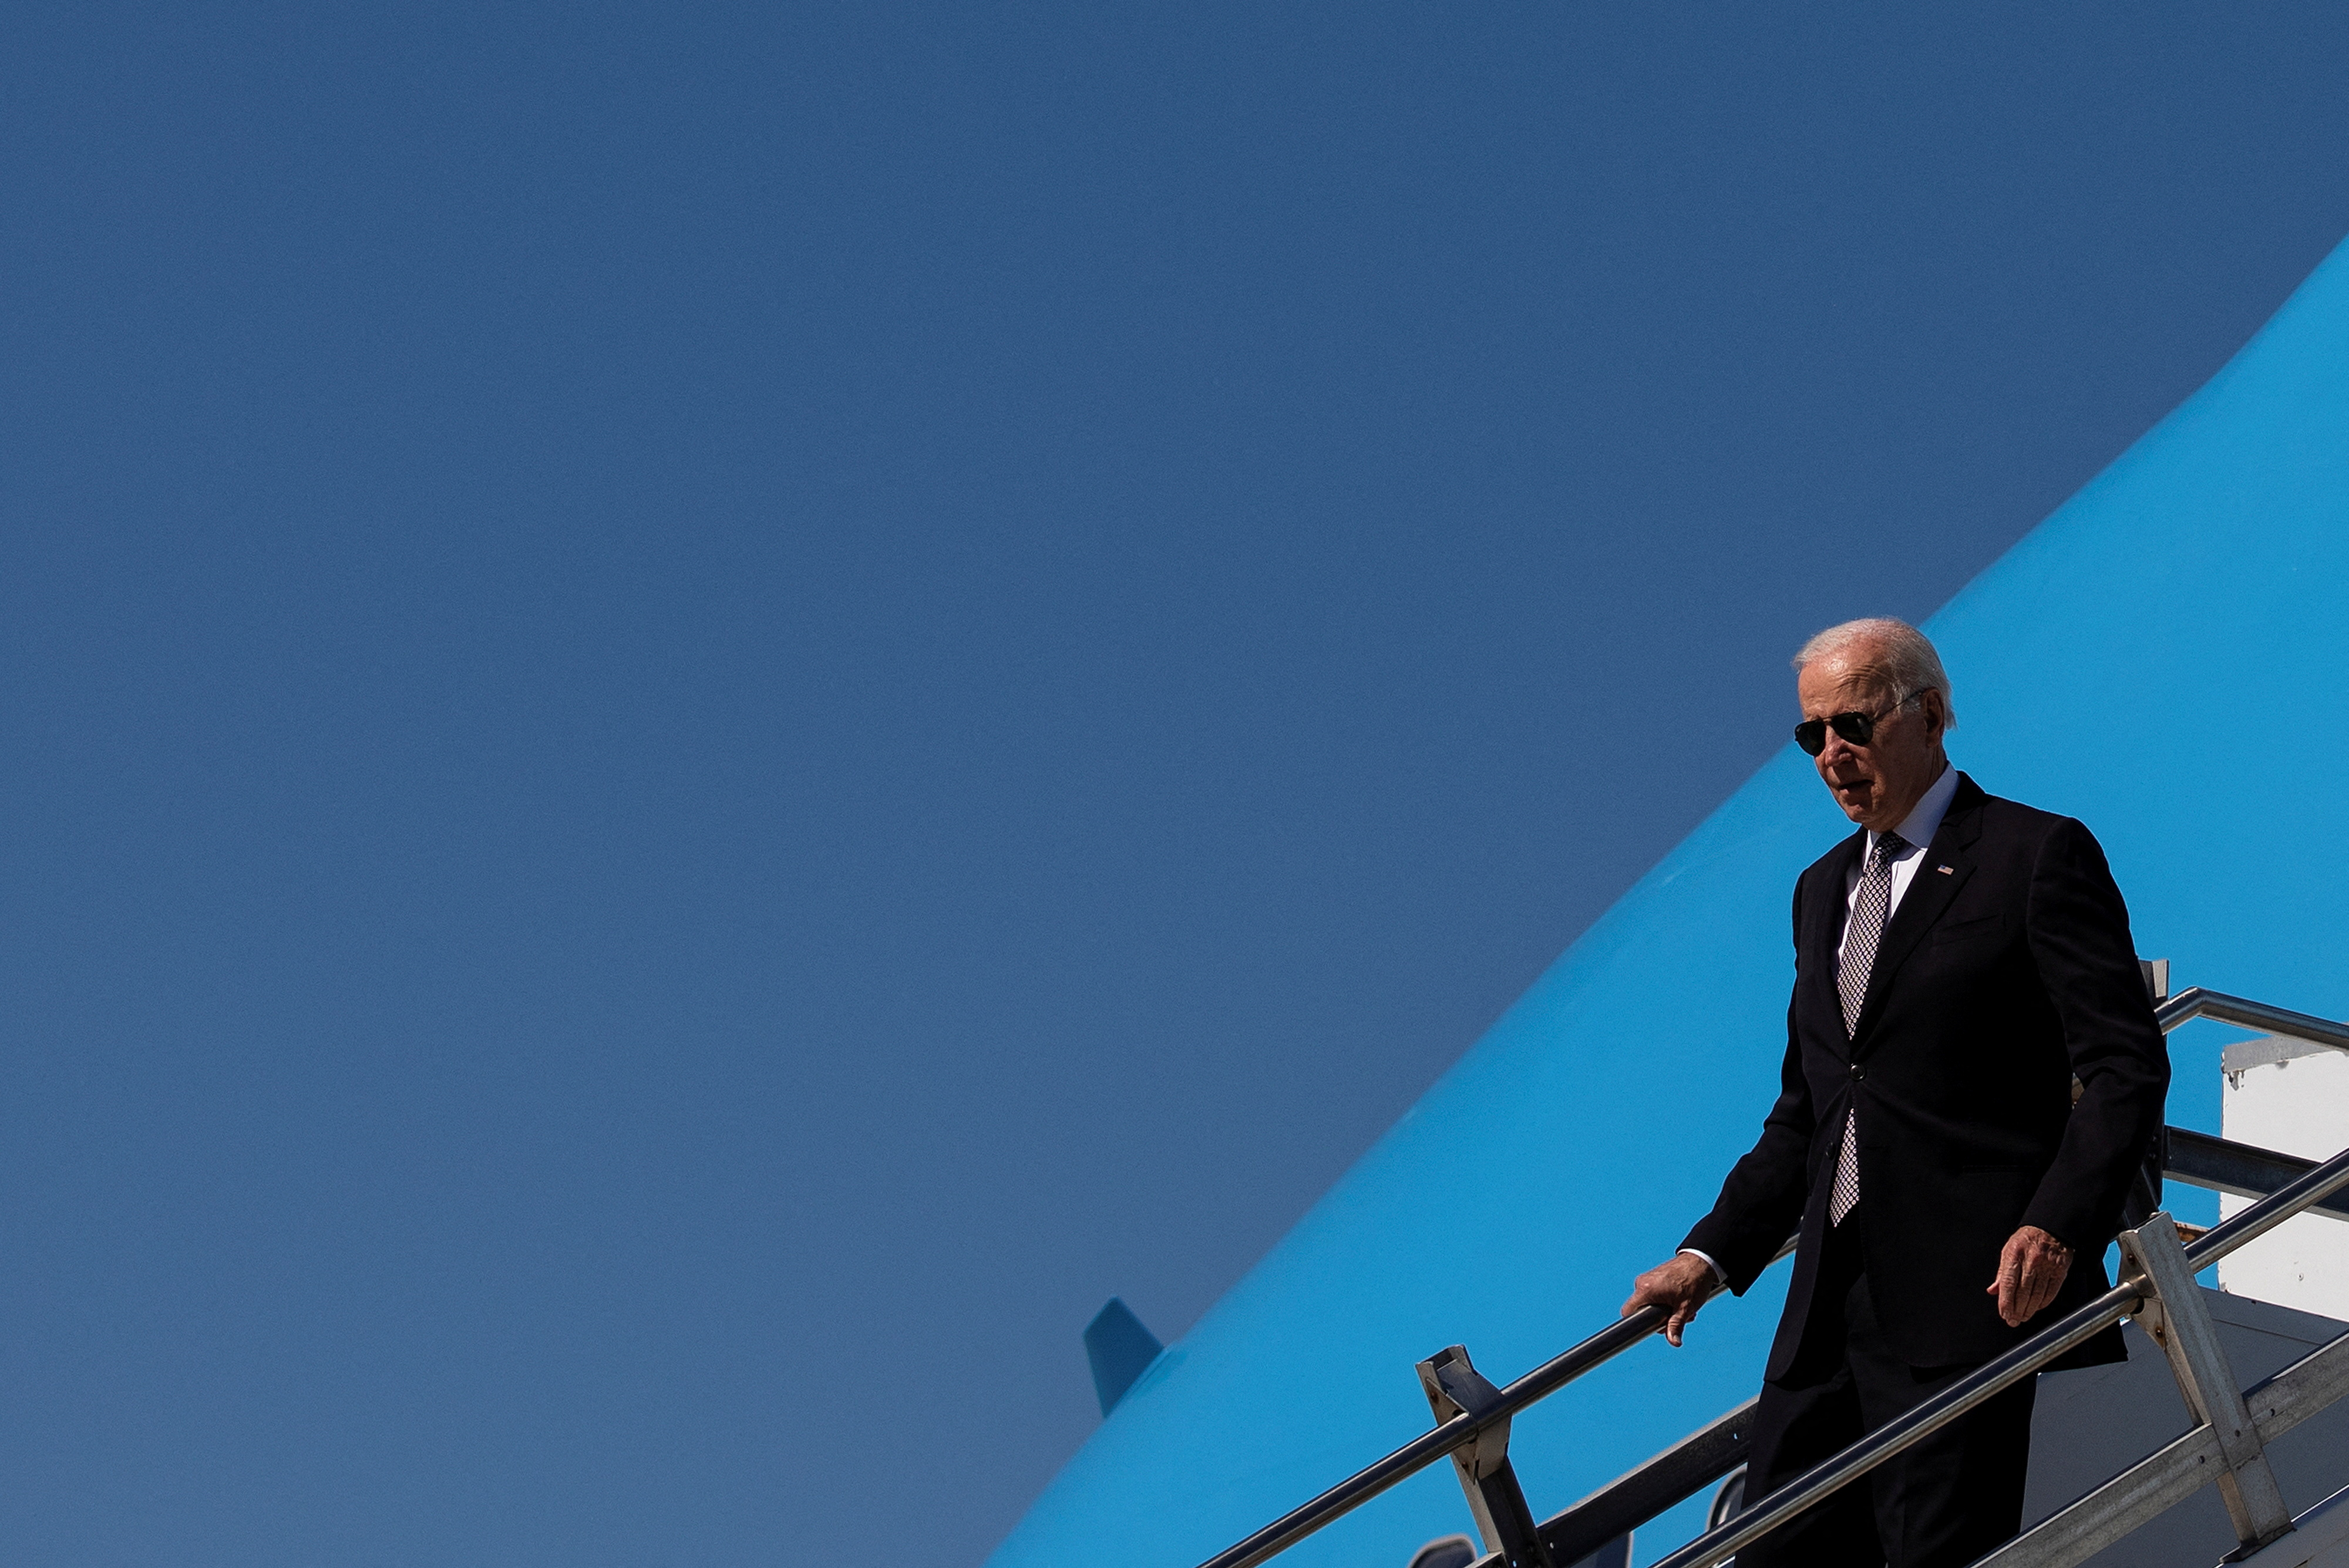 Two cheers for Biden's national security record